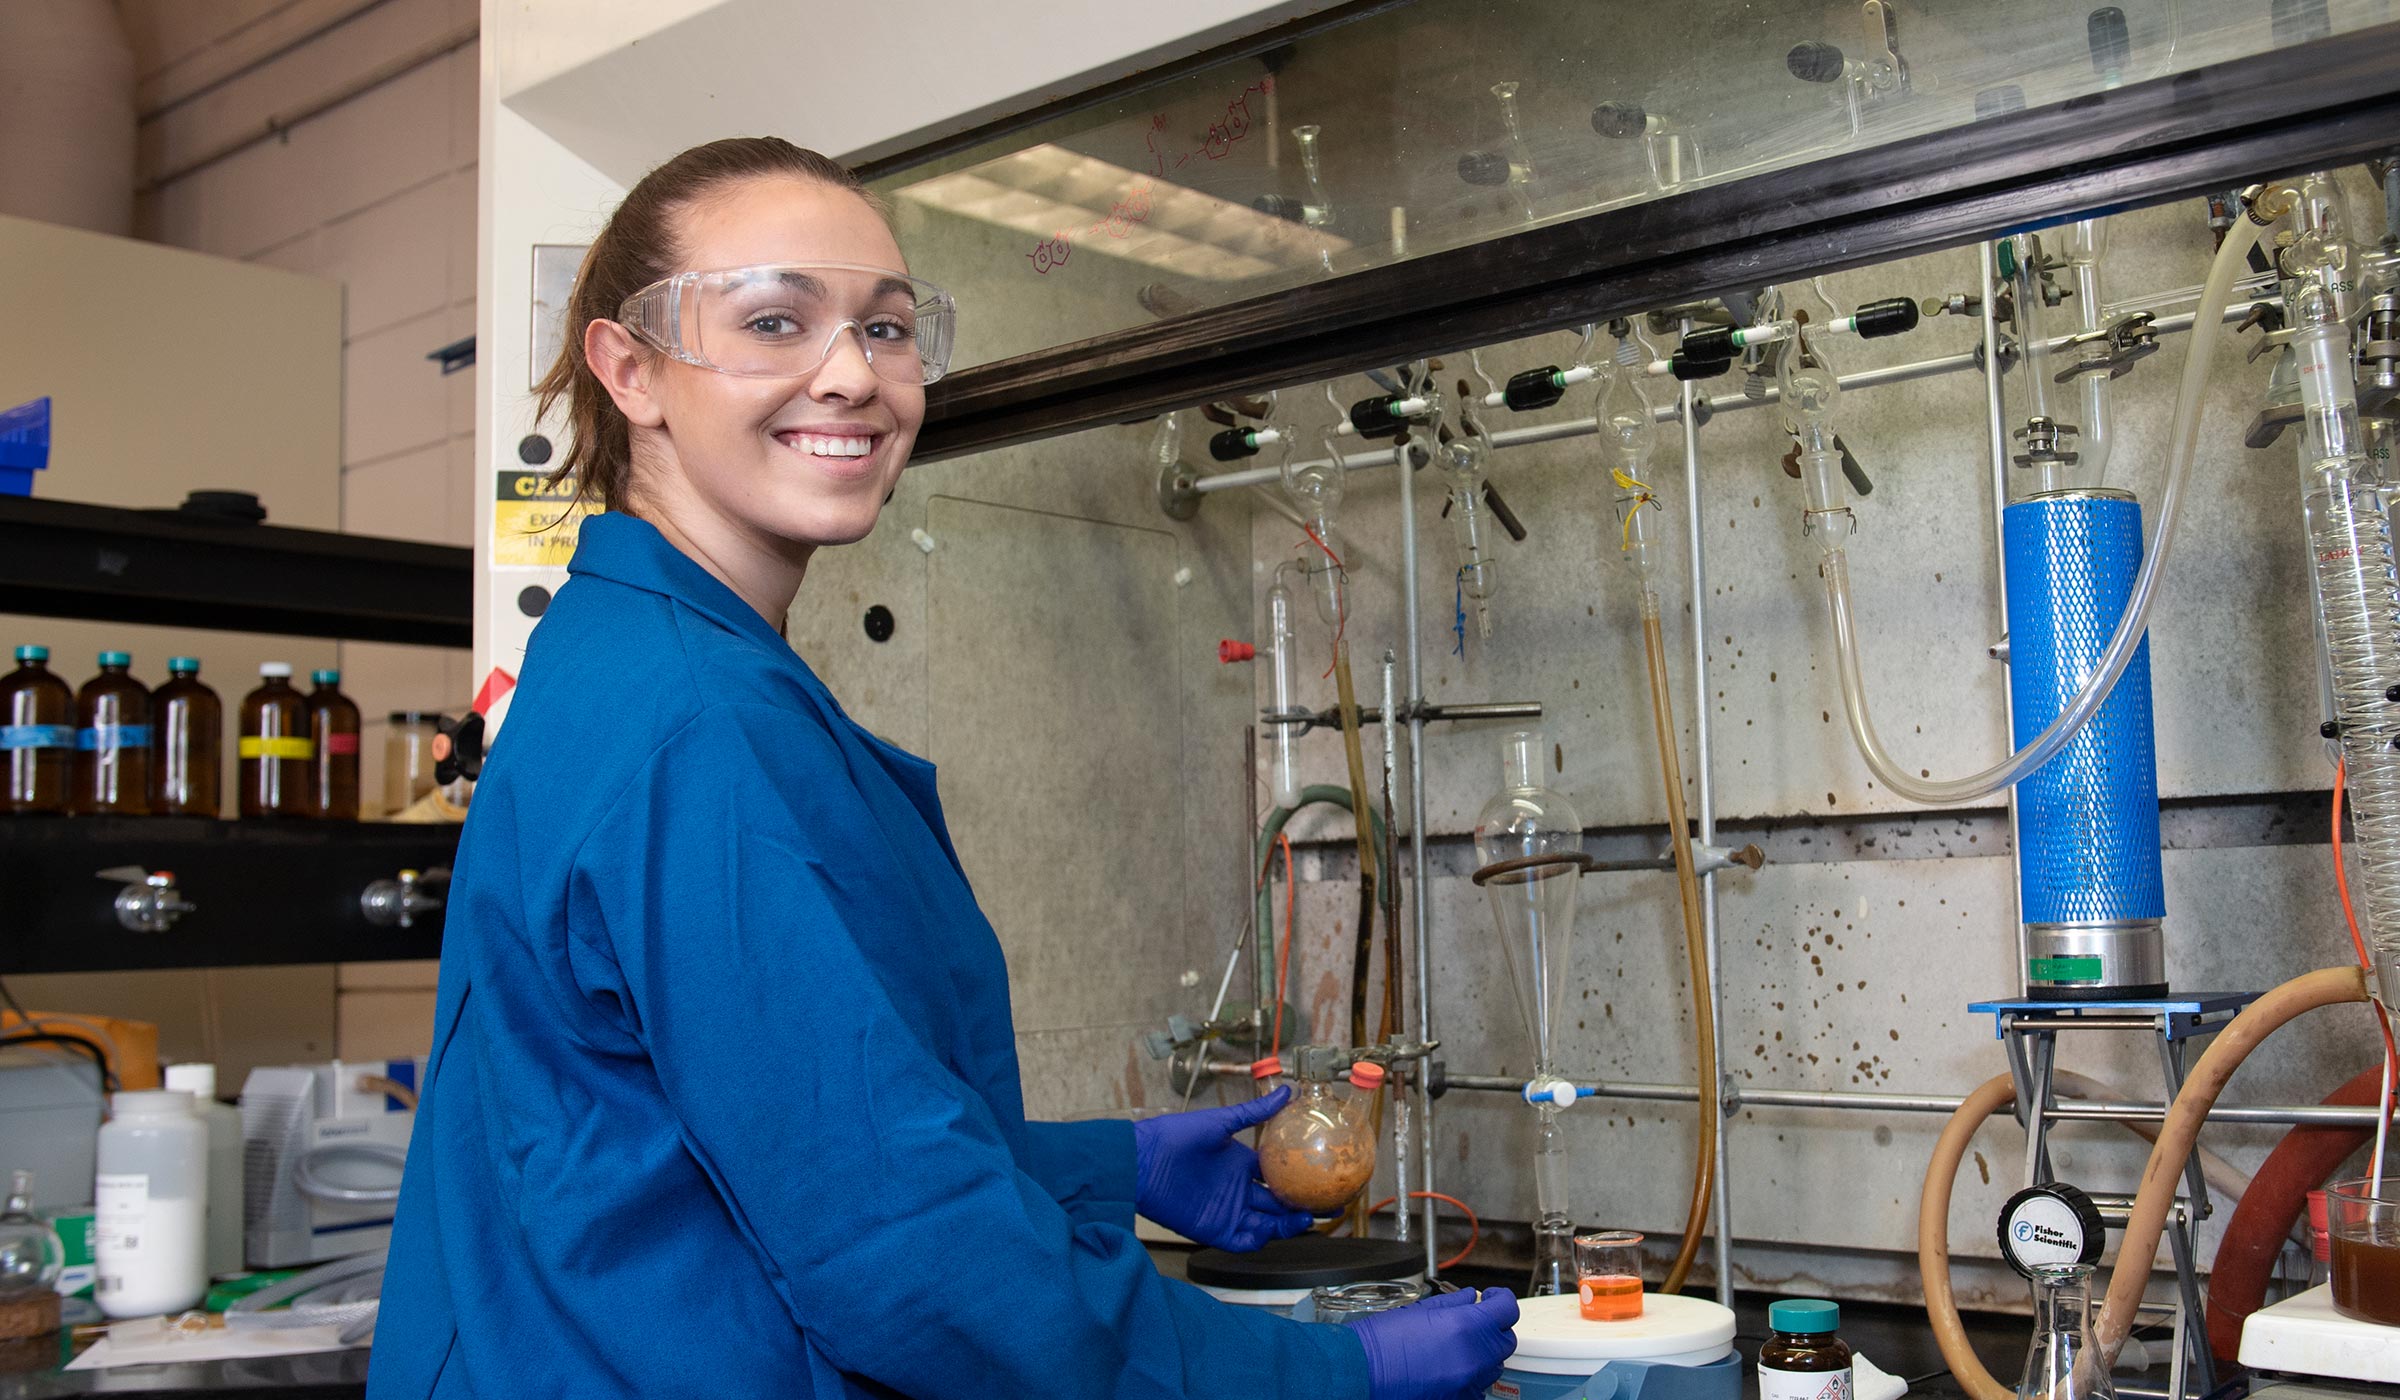 Zoe Fokakis, pictured working in an MSU chemistry lab.